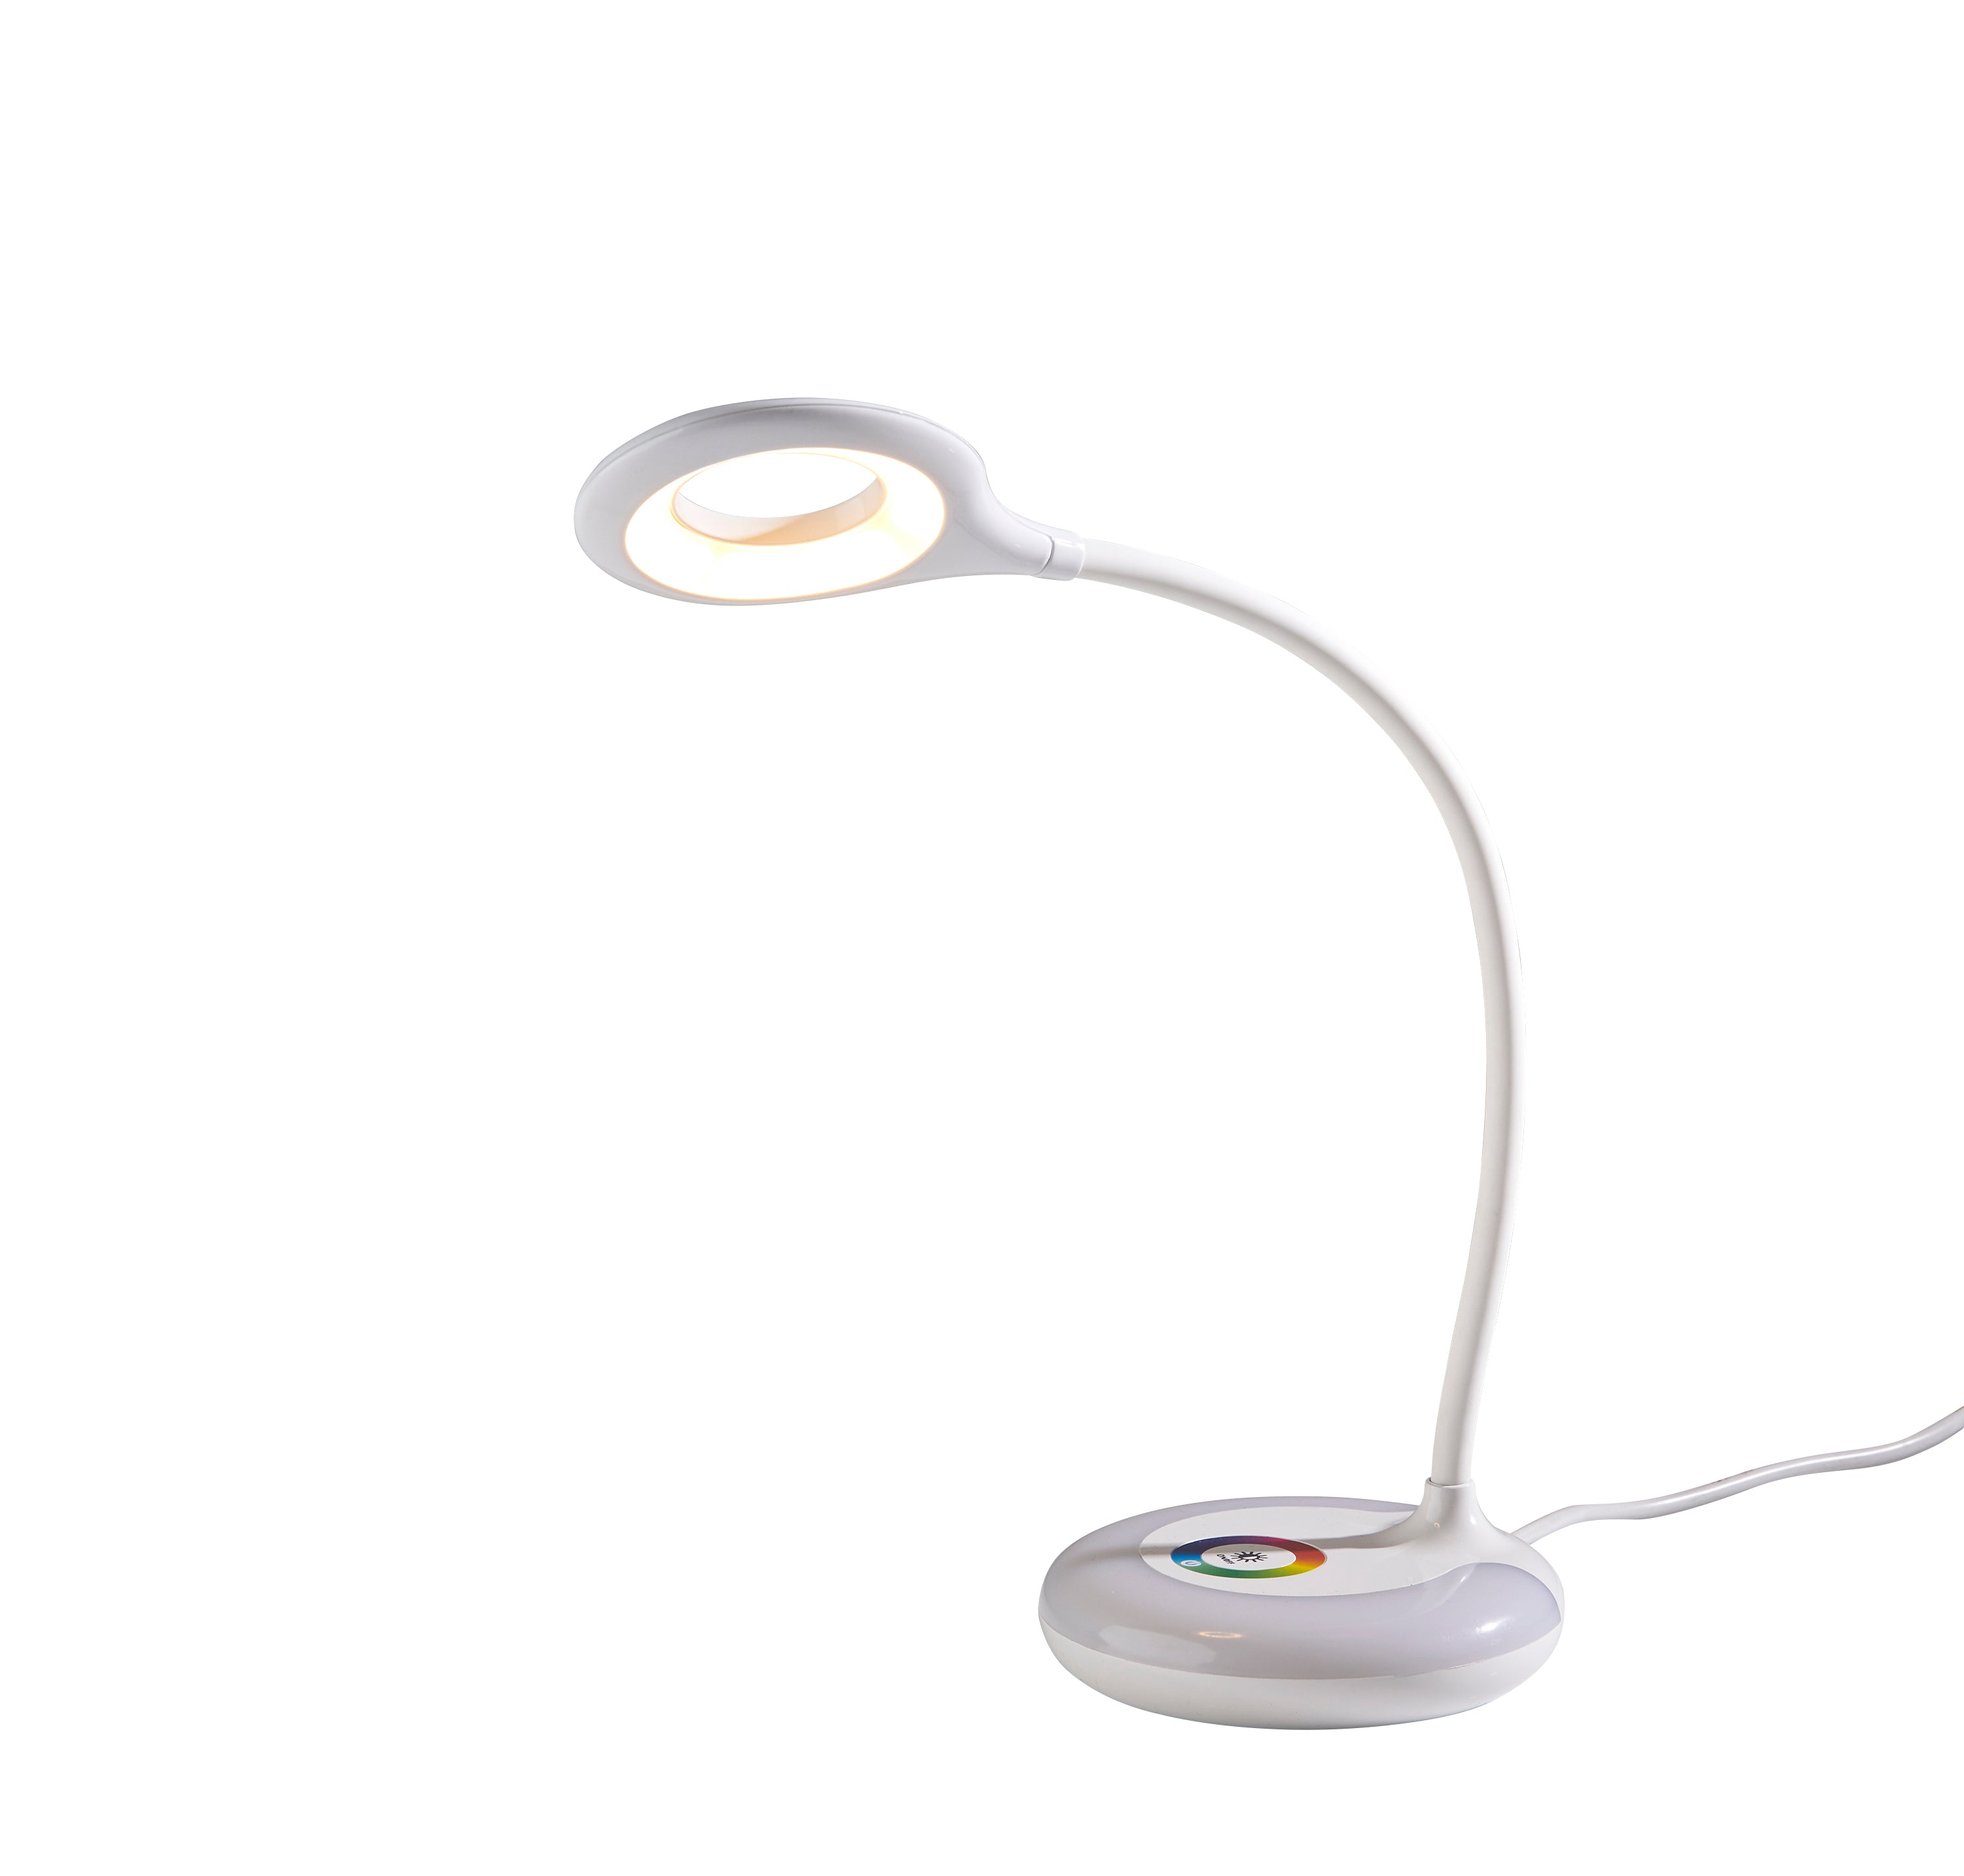 NORA Table lamp White INTEGRATED LED - SL5002-02 | ADESSO